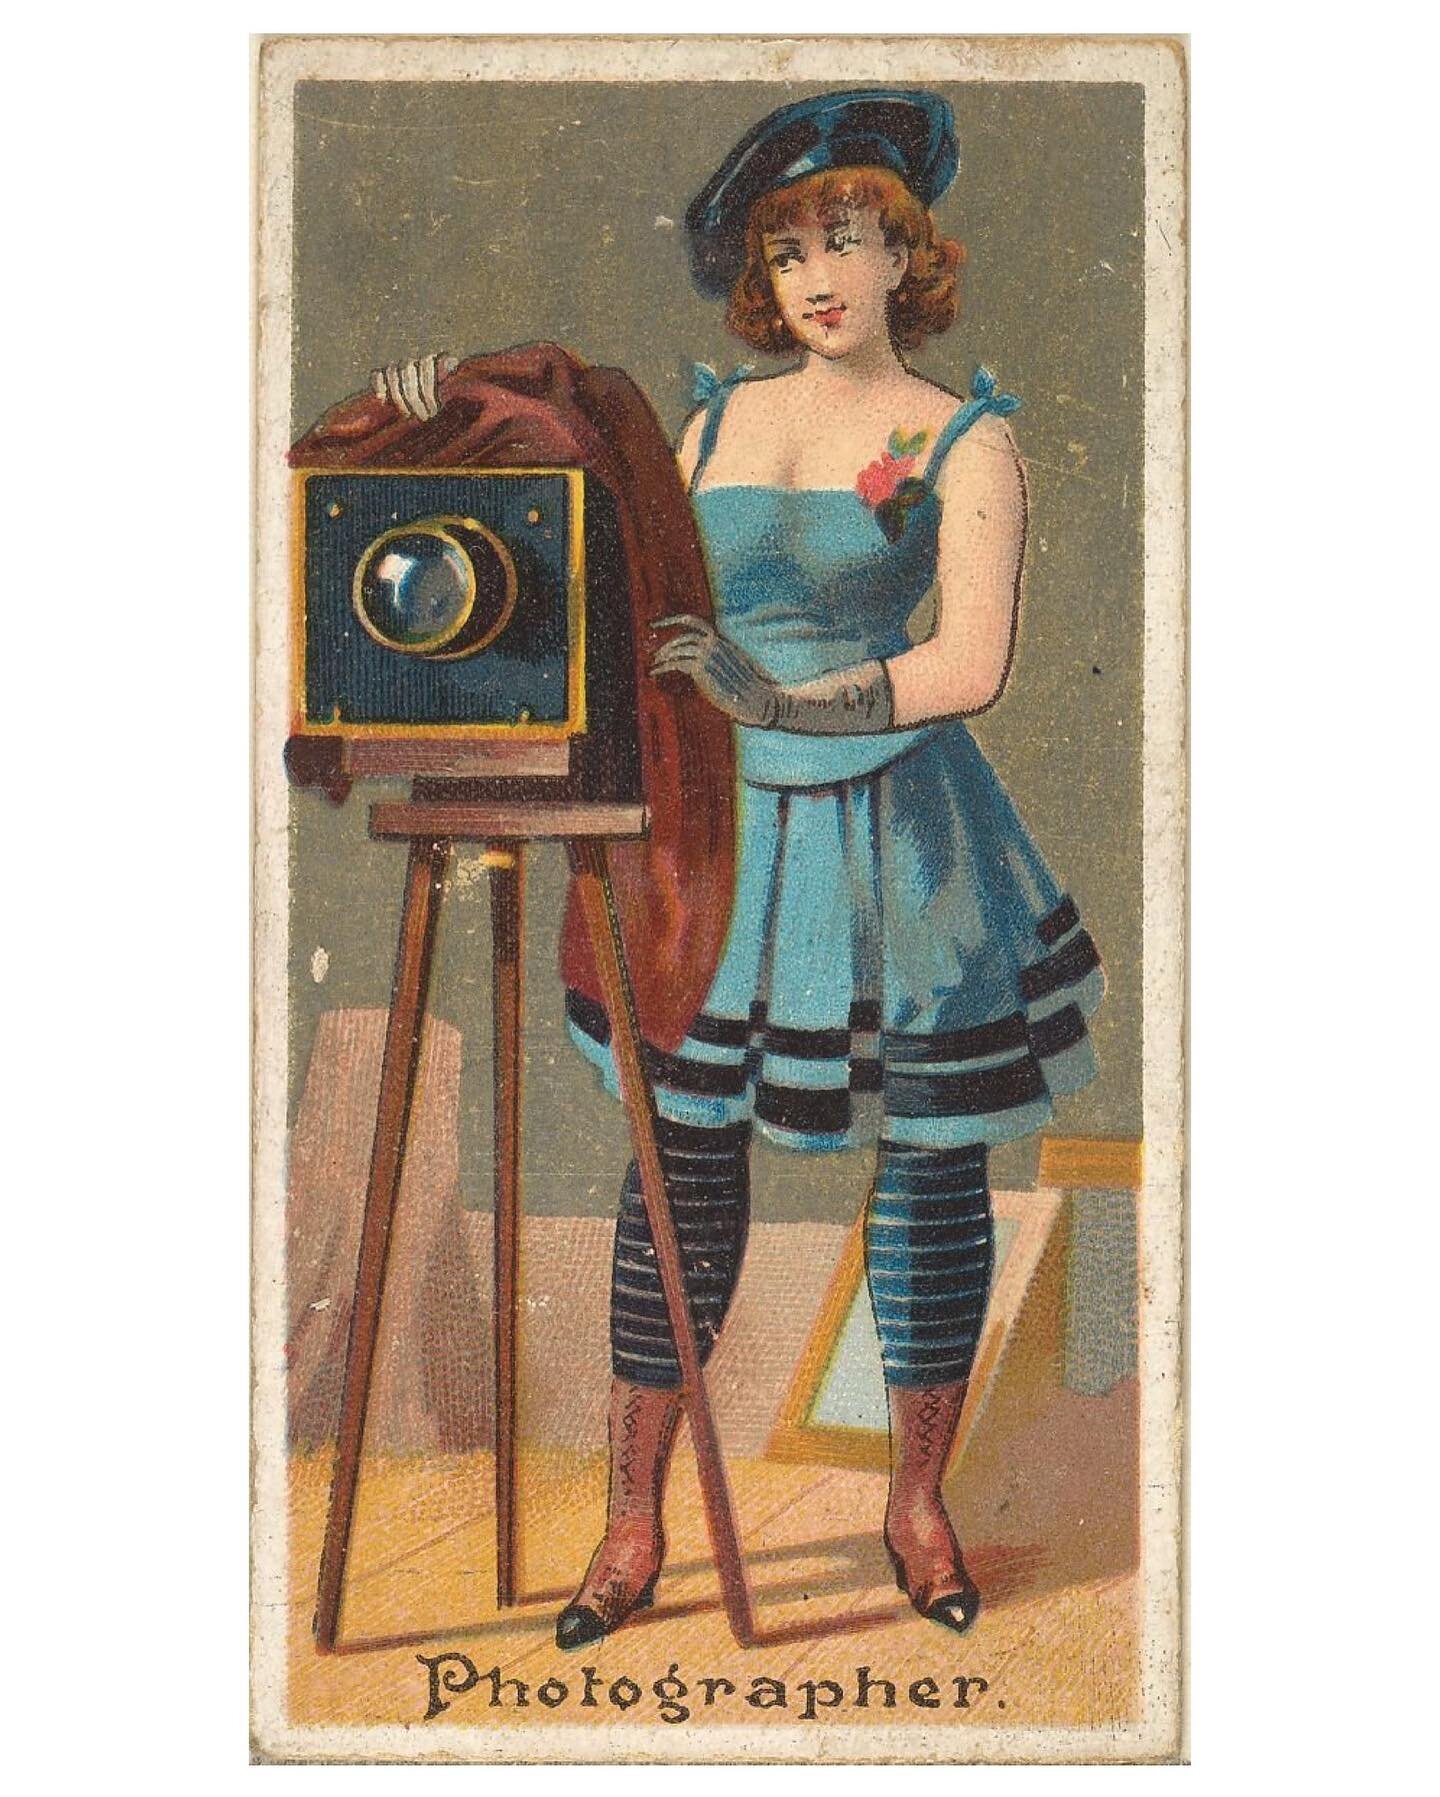 Photographer, from the Occupations of Women series for Frishmuth's Tobacco Company
1889 📷👗 Full collection @metmuseum 

.

.
.

#vintagephotography #vintage #photography #femalephotographers #photographer #femalephotographer #vintagephoto #vintages